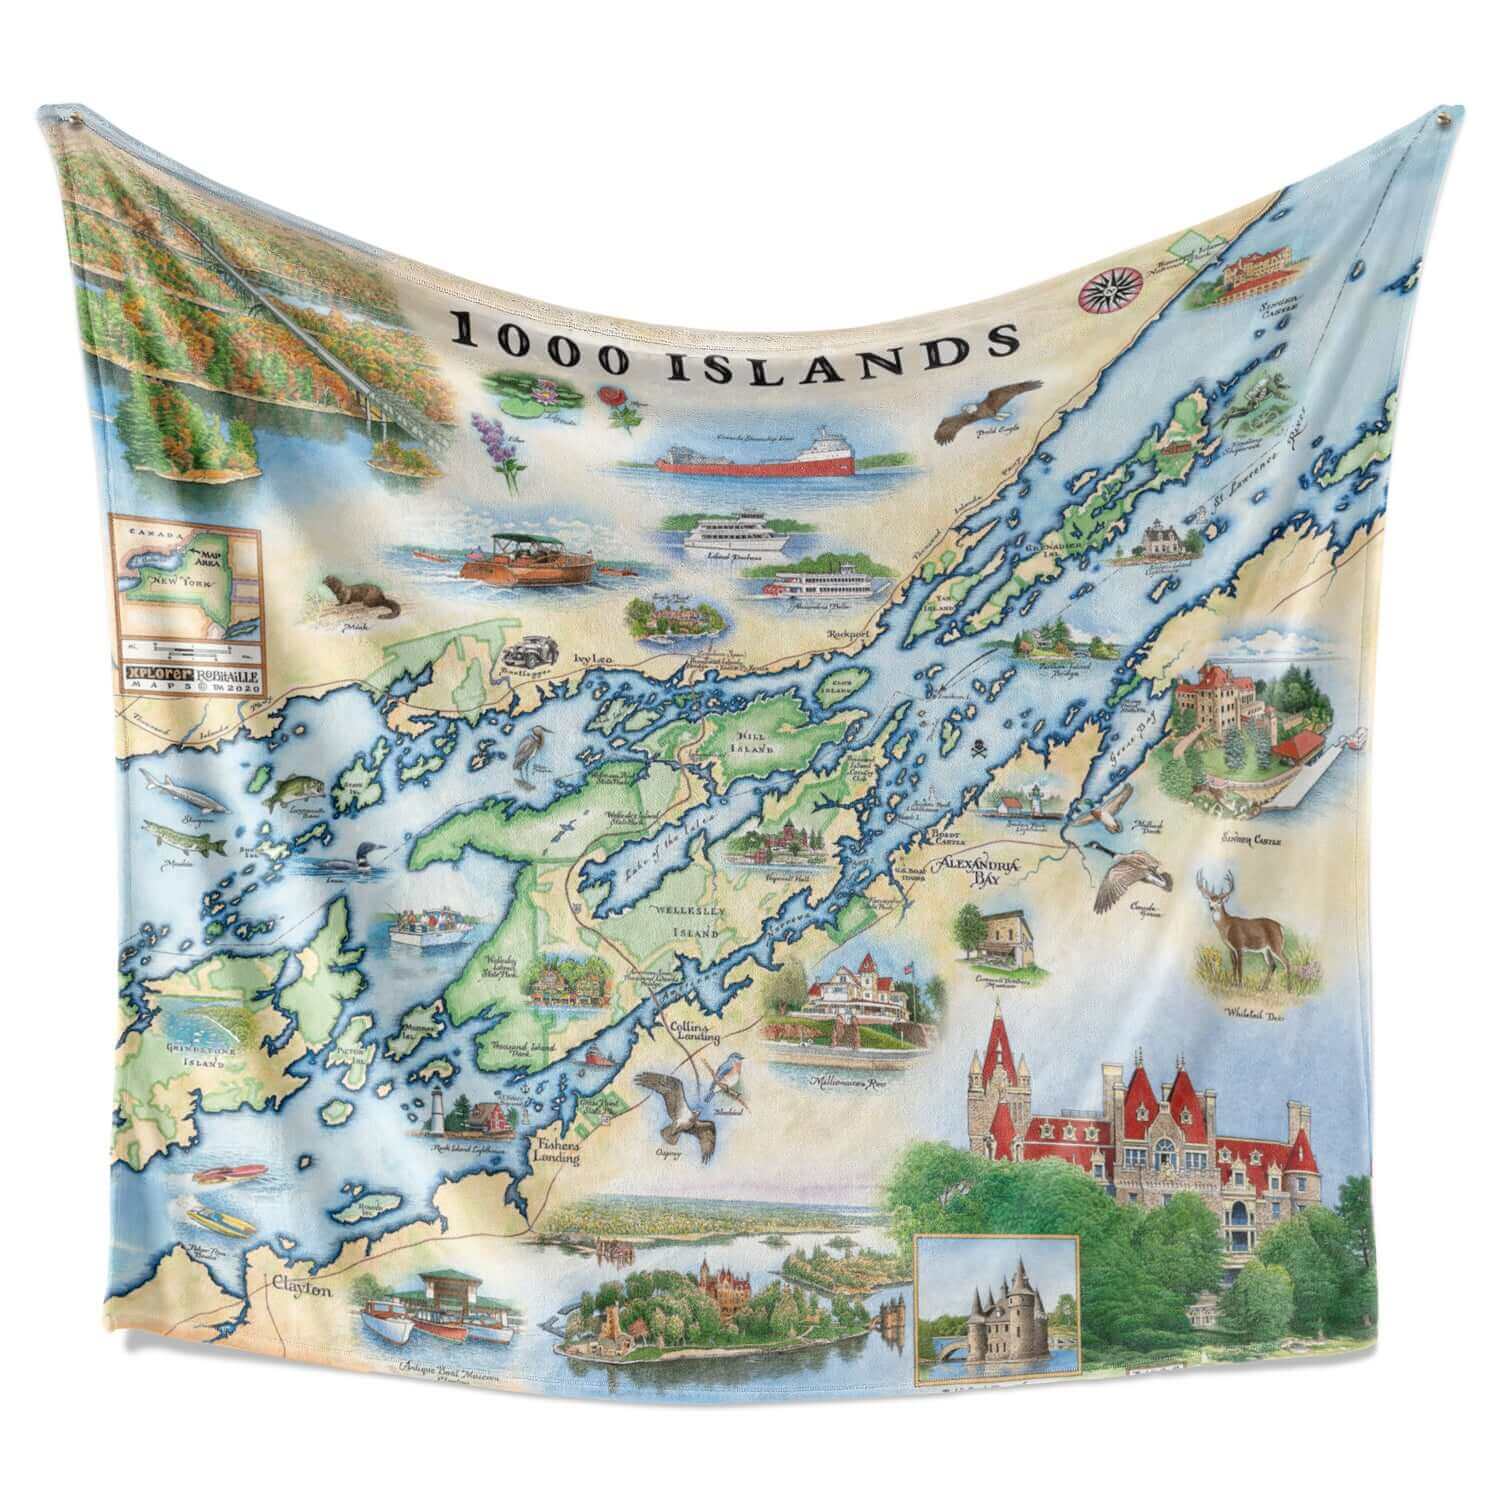 1000 Islands Map Fleece Blanket made of microfiber fleece and Berber fleece. The earth tone map features Eagle Point Castle, Bolt Castle, and Singer Castle. Flora and Fauna include Lilacs, Lily pads, rose, deer and geese. Activities like boating are also illustrated on the throw. 